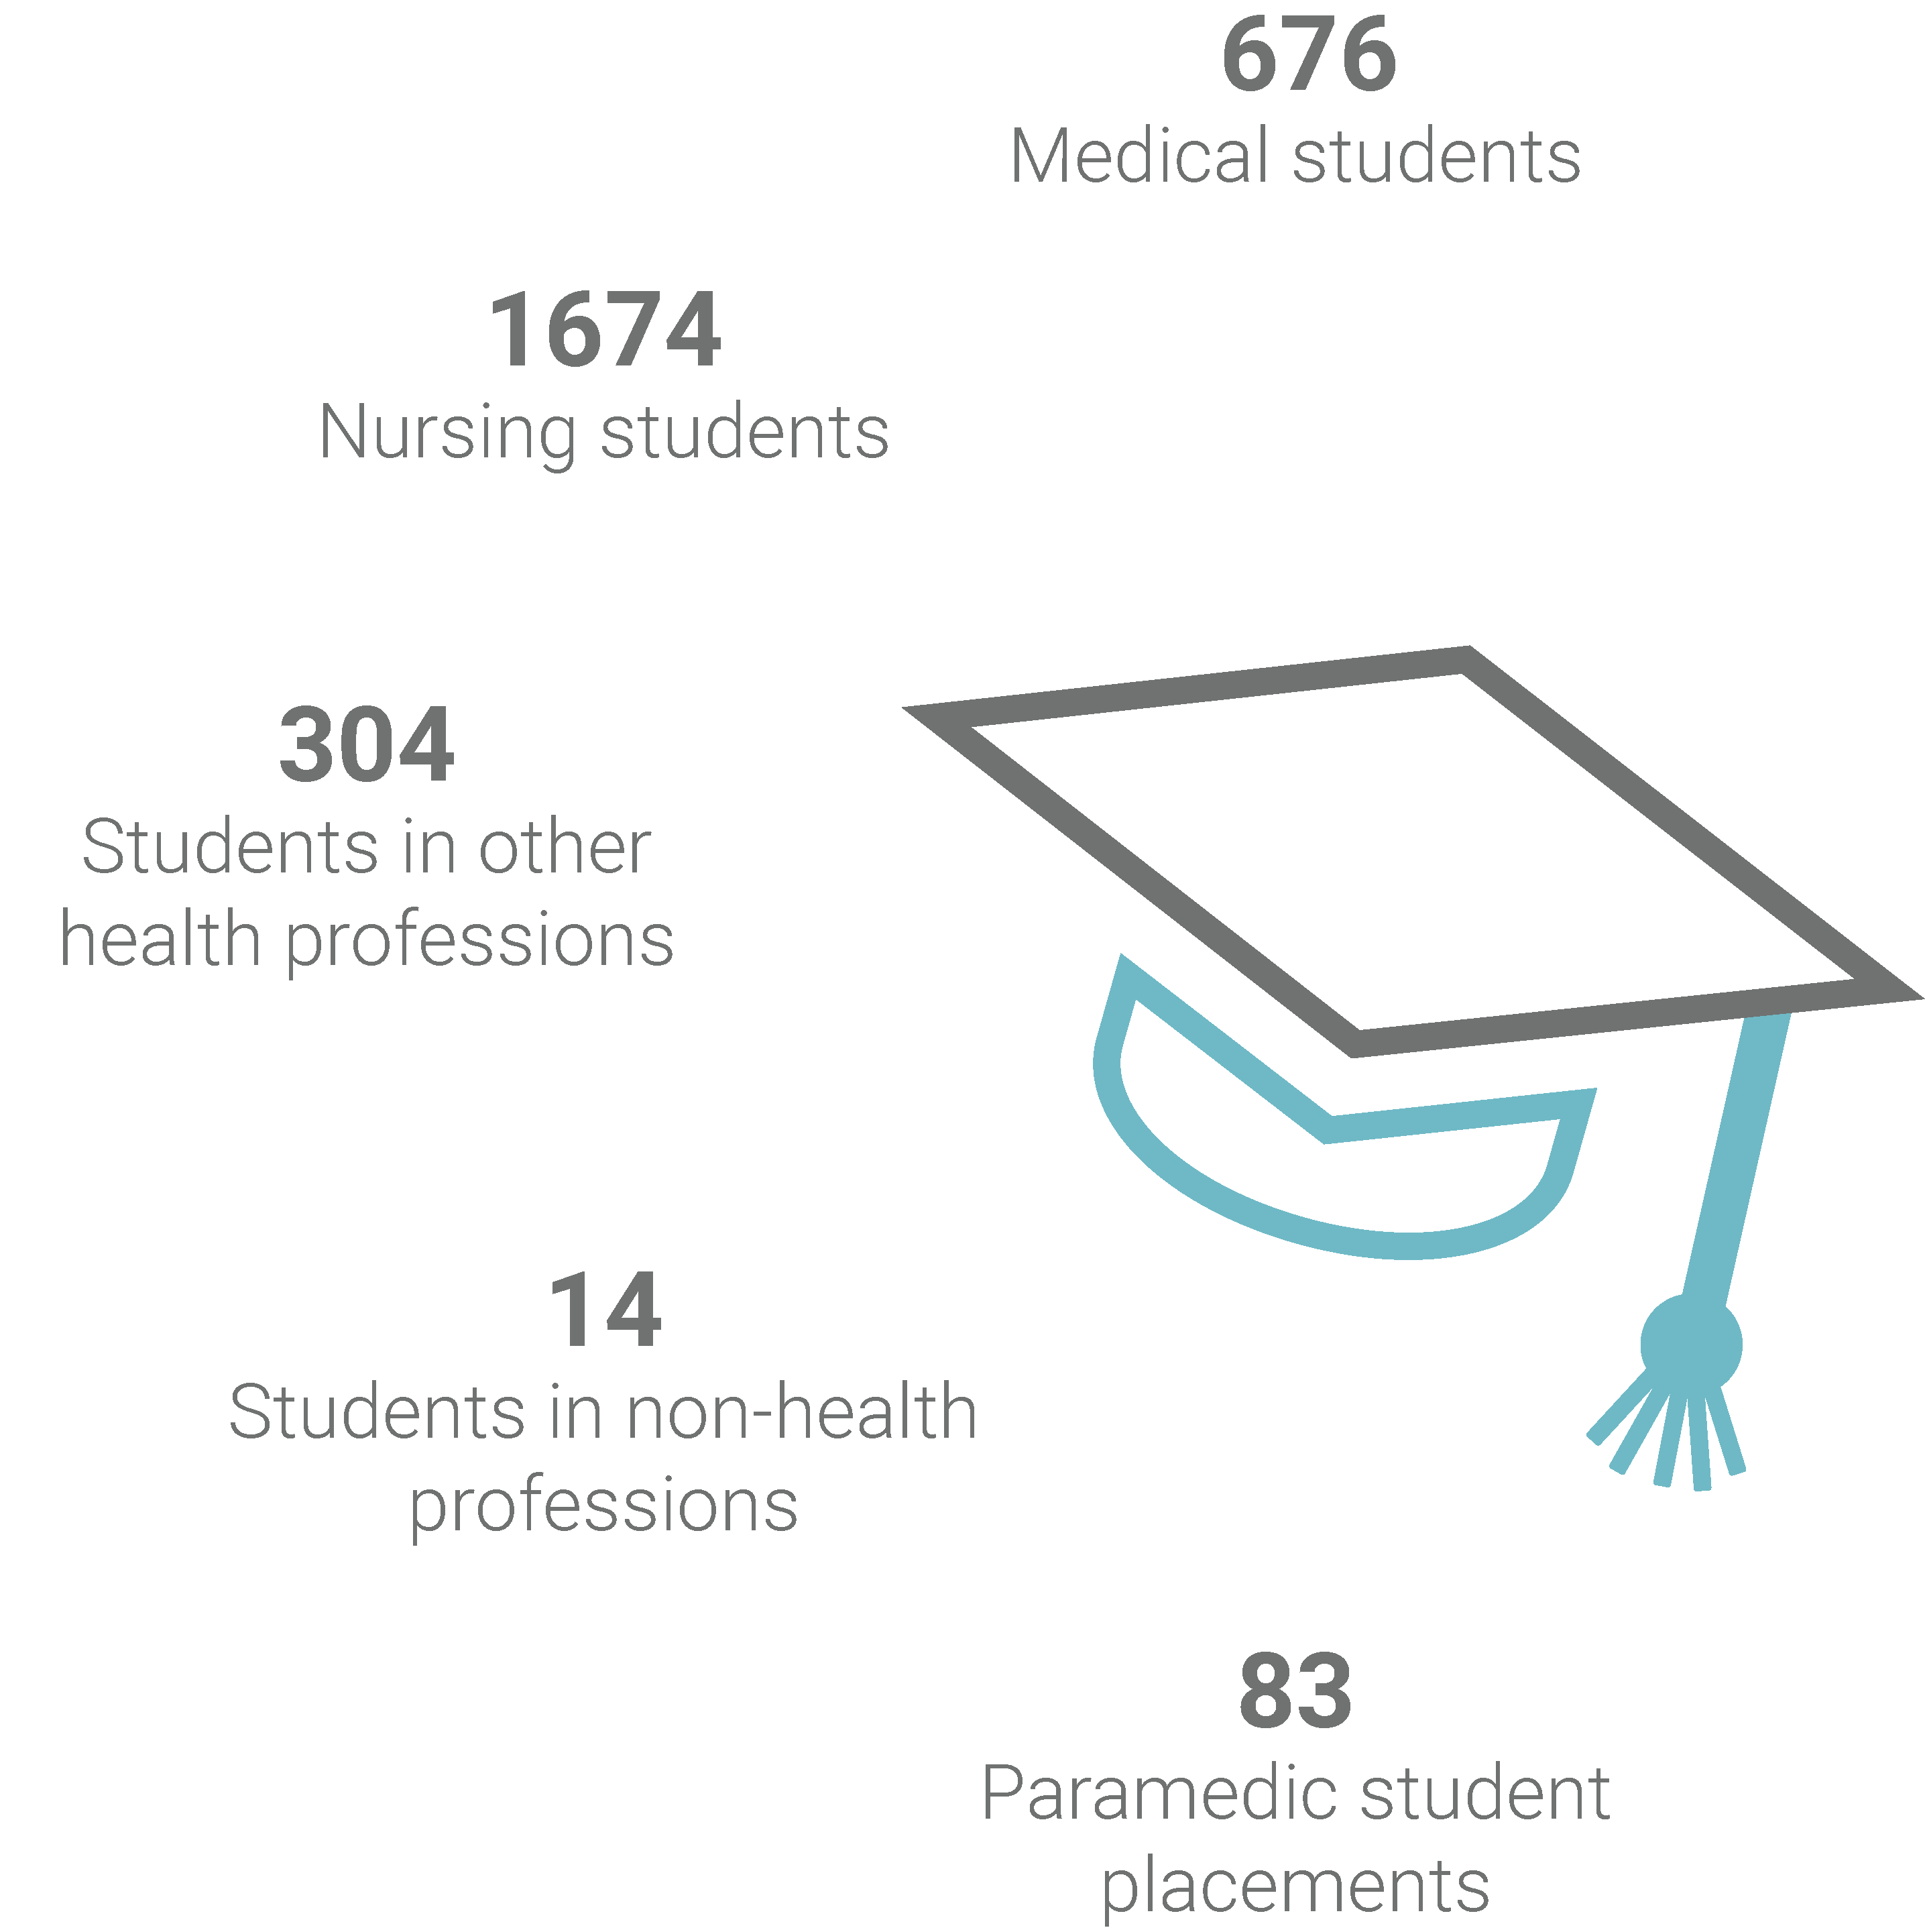 Learners's data-676 Medical students, 1674 Nursing students, 304 Students in other health professions, 14 Students in non-health professions, 83 Paramedic student